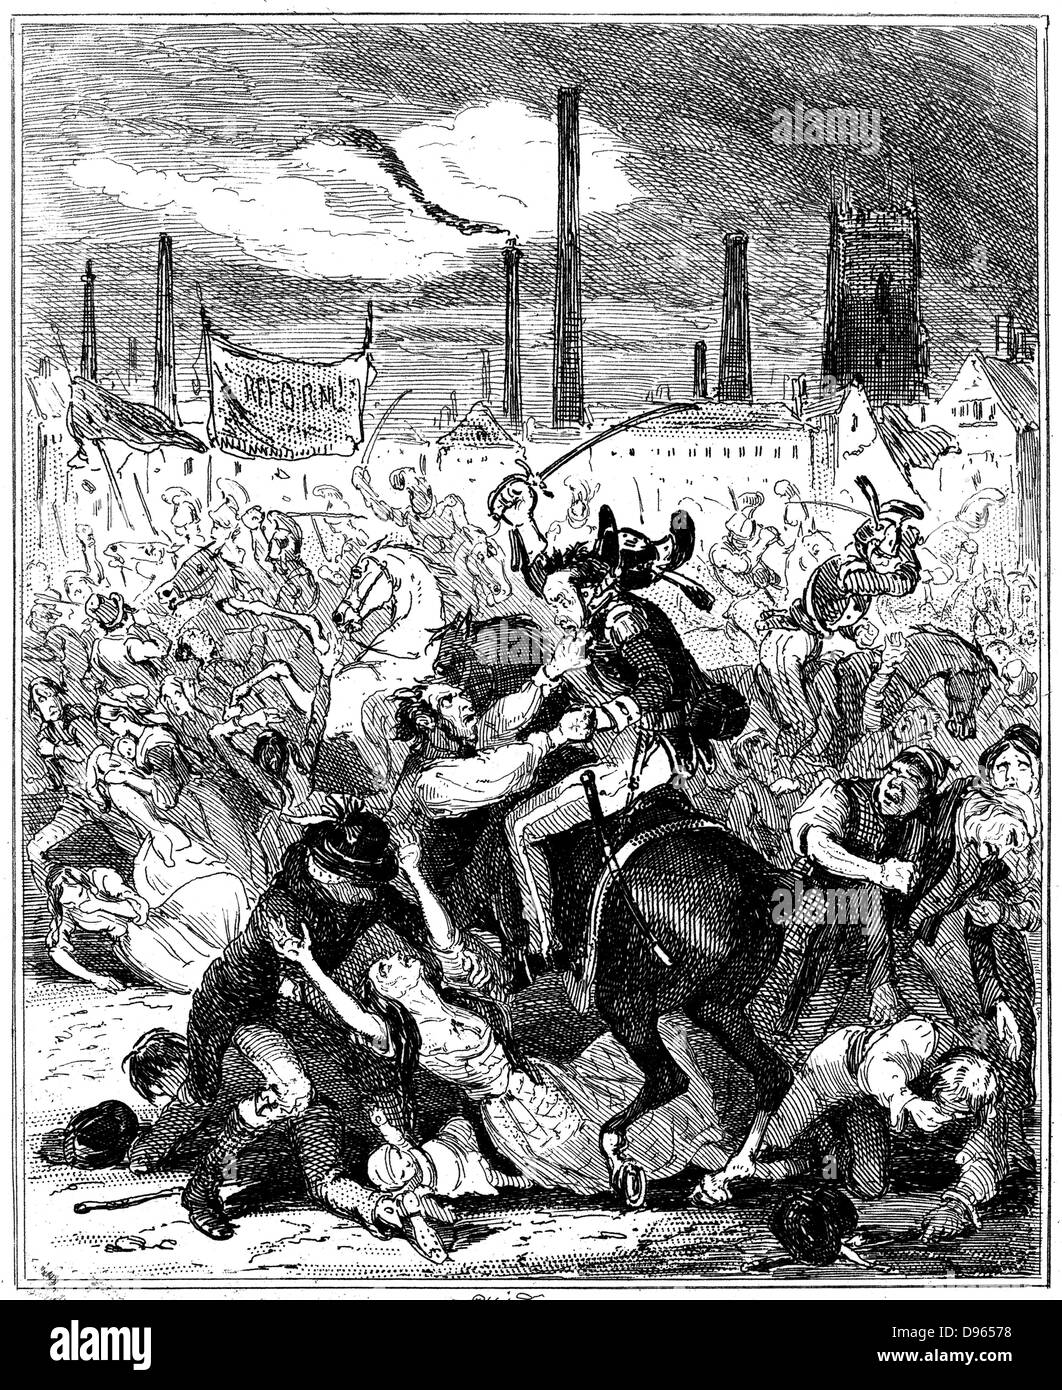 Peterloo Massacre, Manchester, England, 16 August 1819. The 15th Hussars charging an unarmed crowd gathered near St Peter's Church to hear speeches supporting Reform of Parliament and repeal of Corn Laws. 6 of the crowd were killed, about 70 wounded treated in local infirmaries. Illustration by 'Phiz' (Hablot Knight Browne) for 'The Chronicles of Crime' by Camden Pelham (London, 1887). Stock Photo